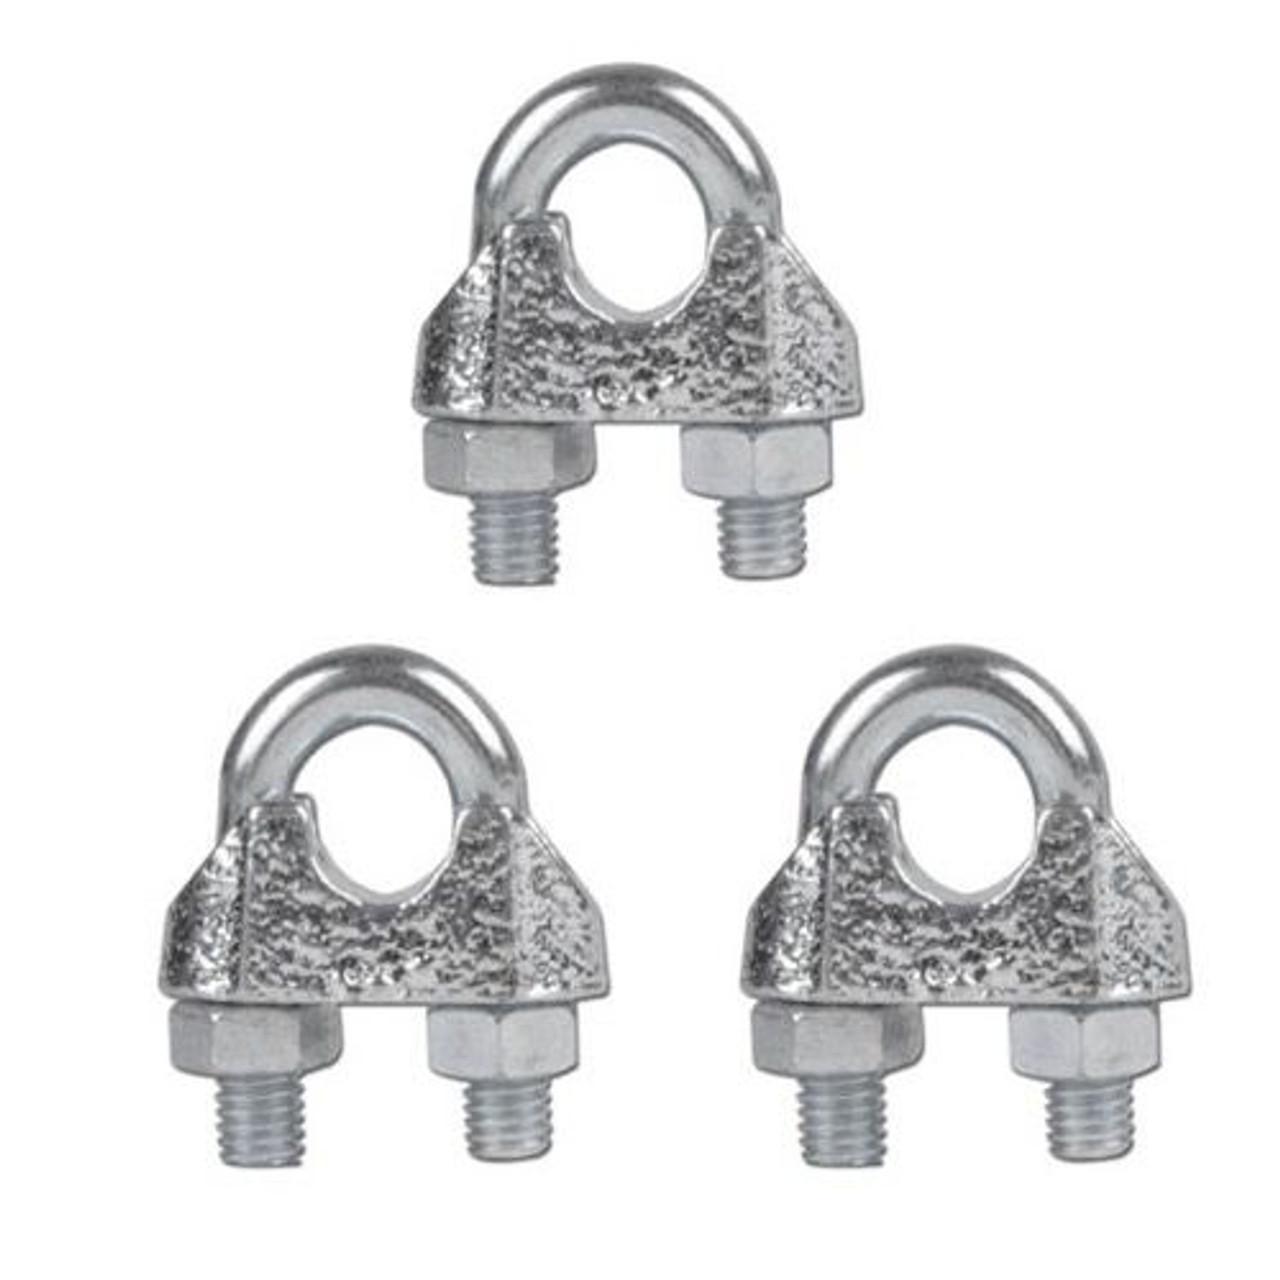 Channel Master Guy Wire Cable Clamps 1/8 U-Bolt Fit Up to 1/4 Cable 3 Pack Antenna Mount Fastener Mast Support CM3095 HDTV Antenna Mount, Part # CM-3095